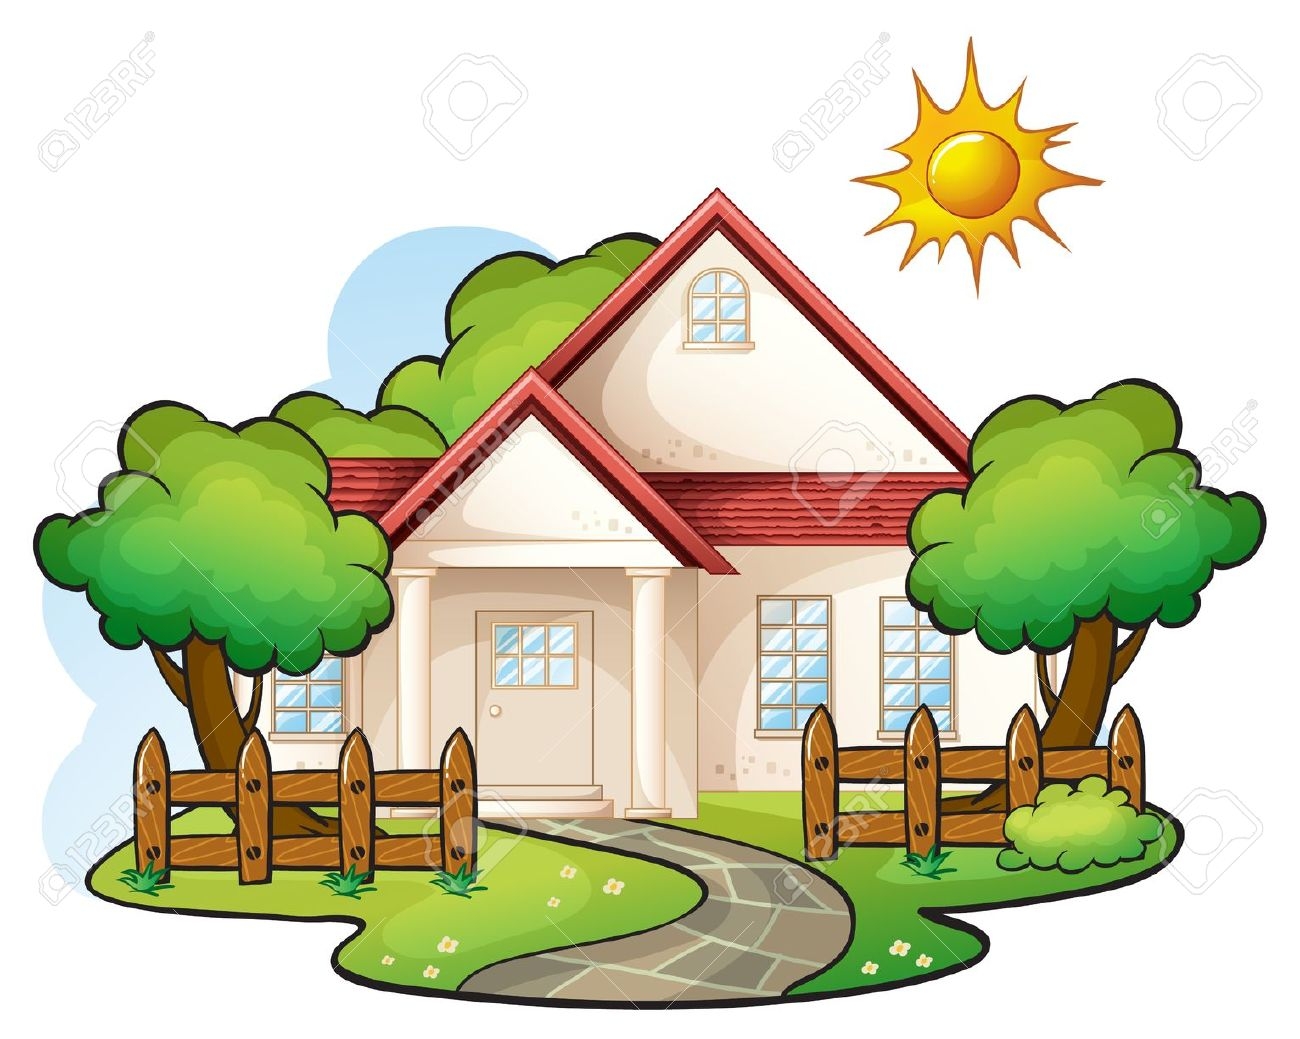 School House Clipart Free